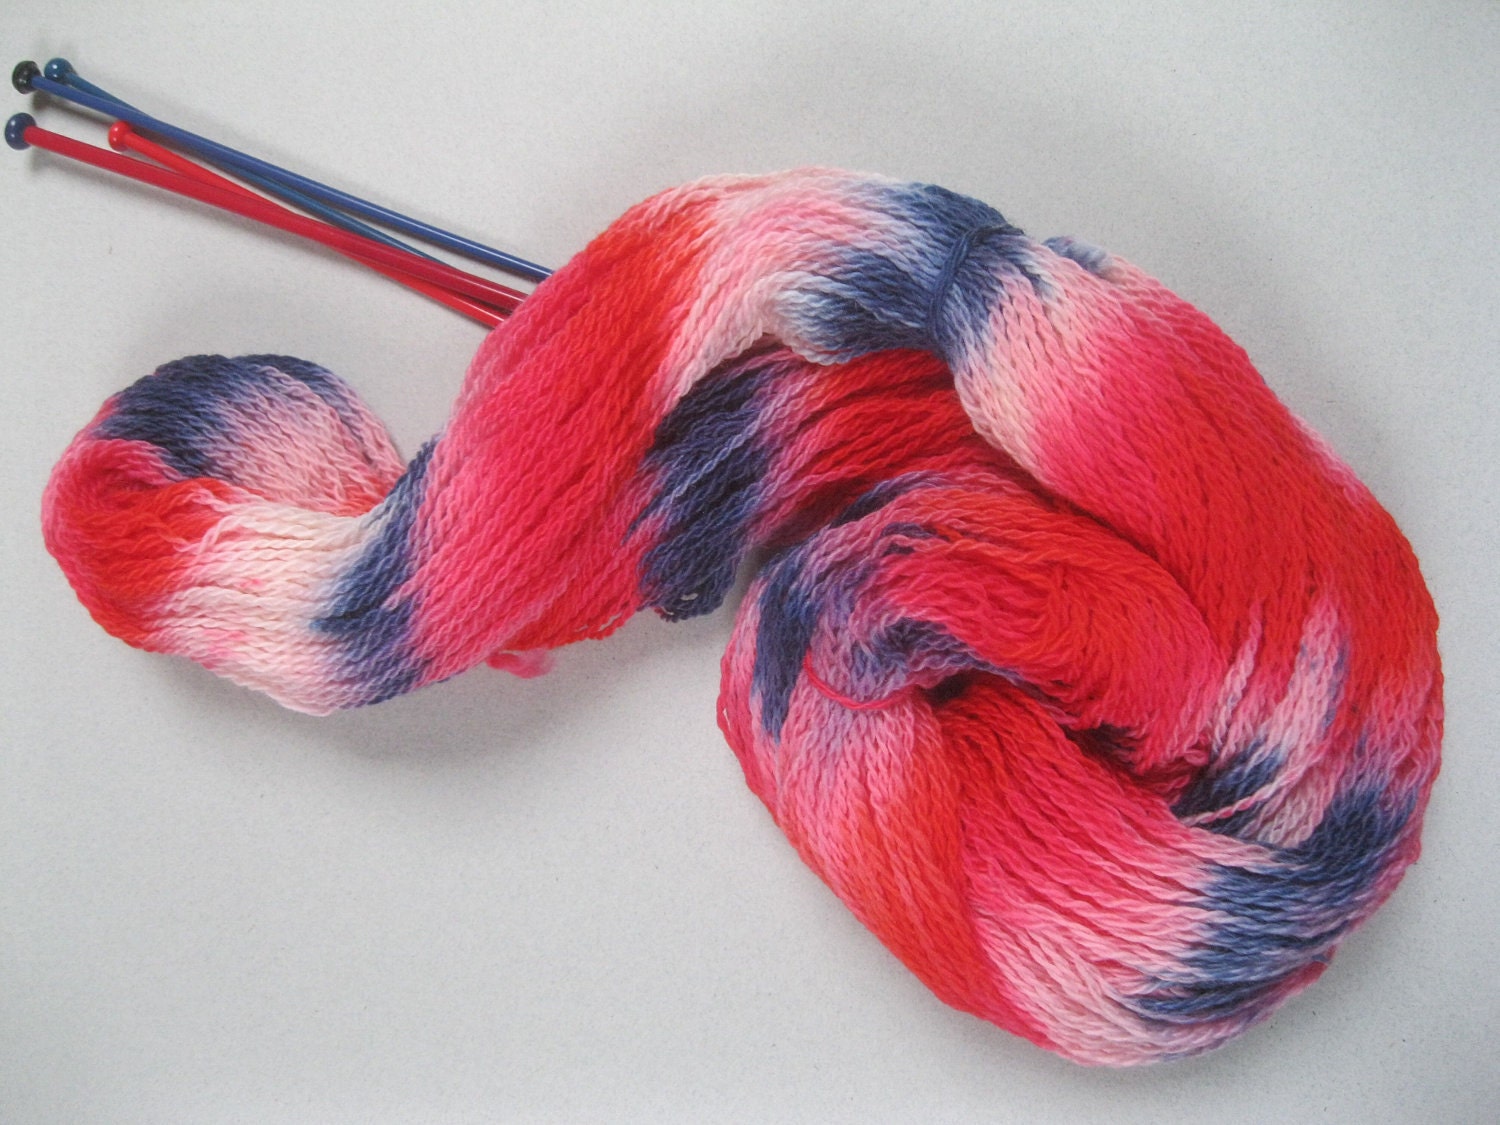 Hand dyed self striping fingering/ 4ply knitting yarn- 'Jubilant' red, white and blue